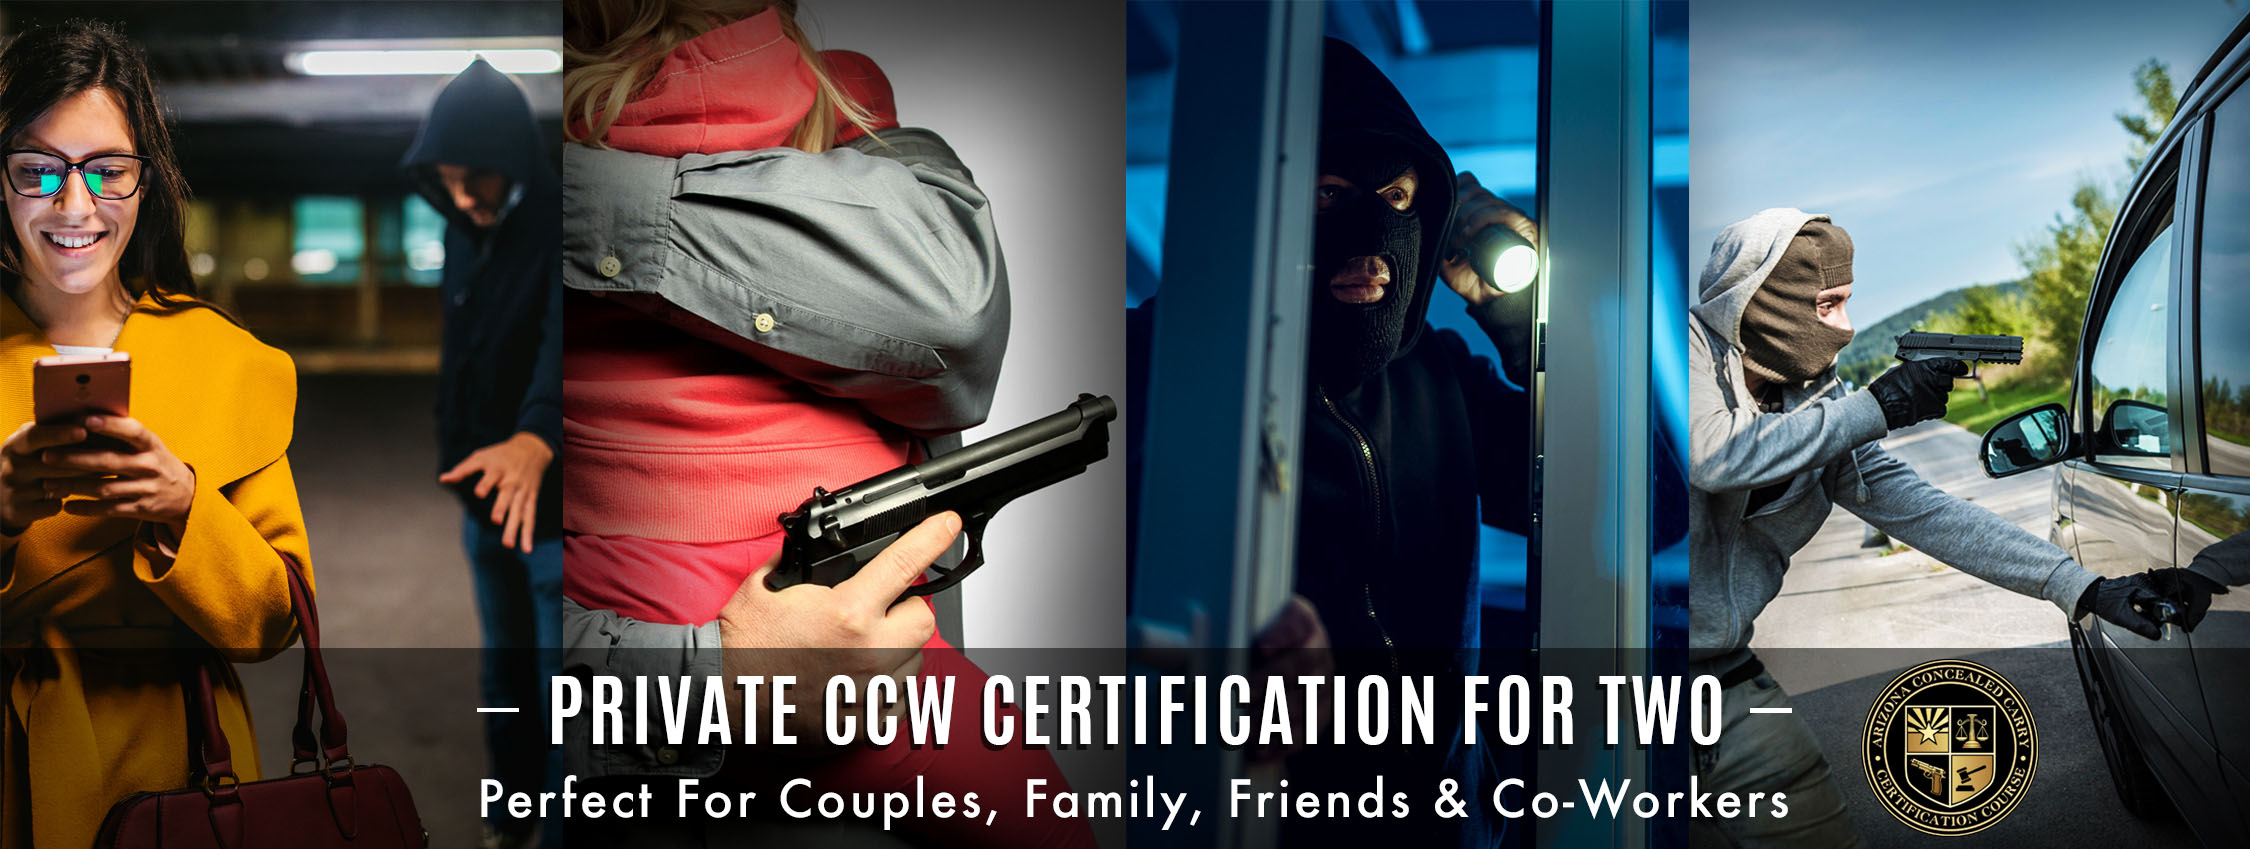 PRIVATE CCW CERTIFICATION FOR TWO